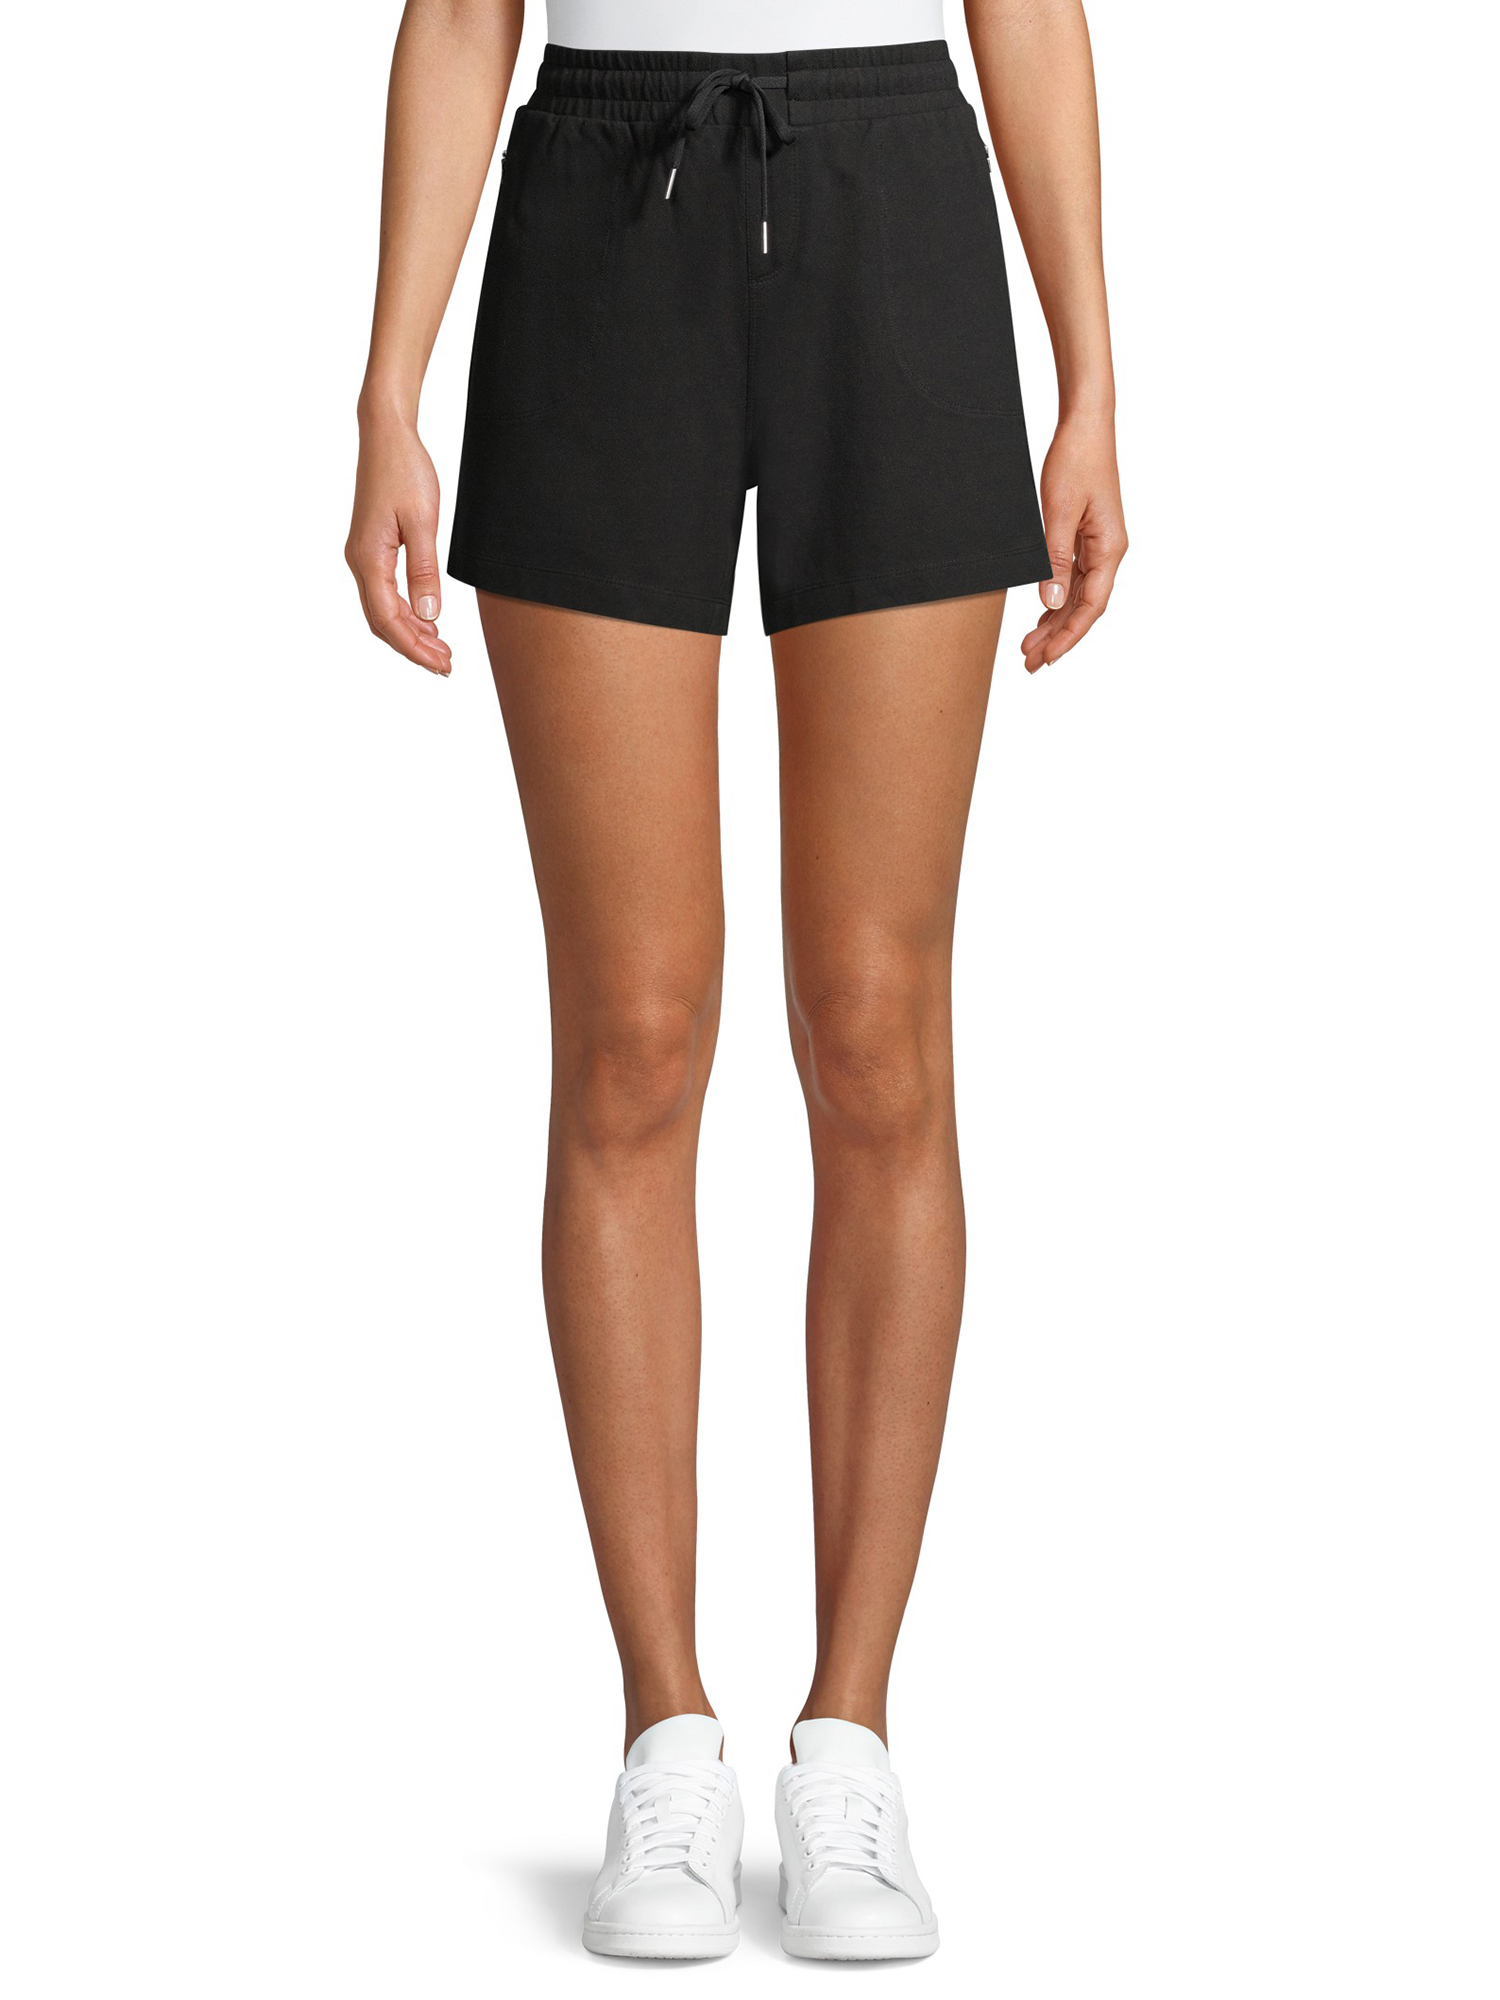 Athletic Works Women's Athleisure Commuter Shorts - image 1 of 7